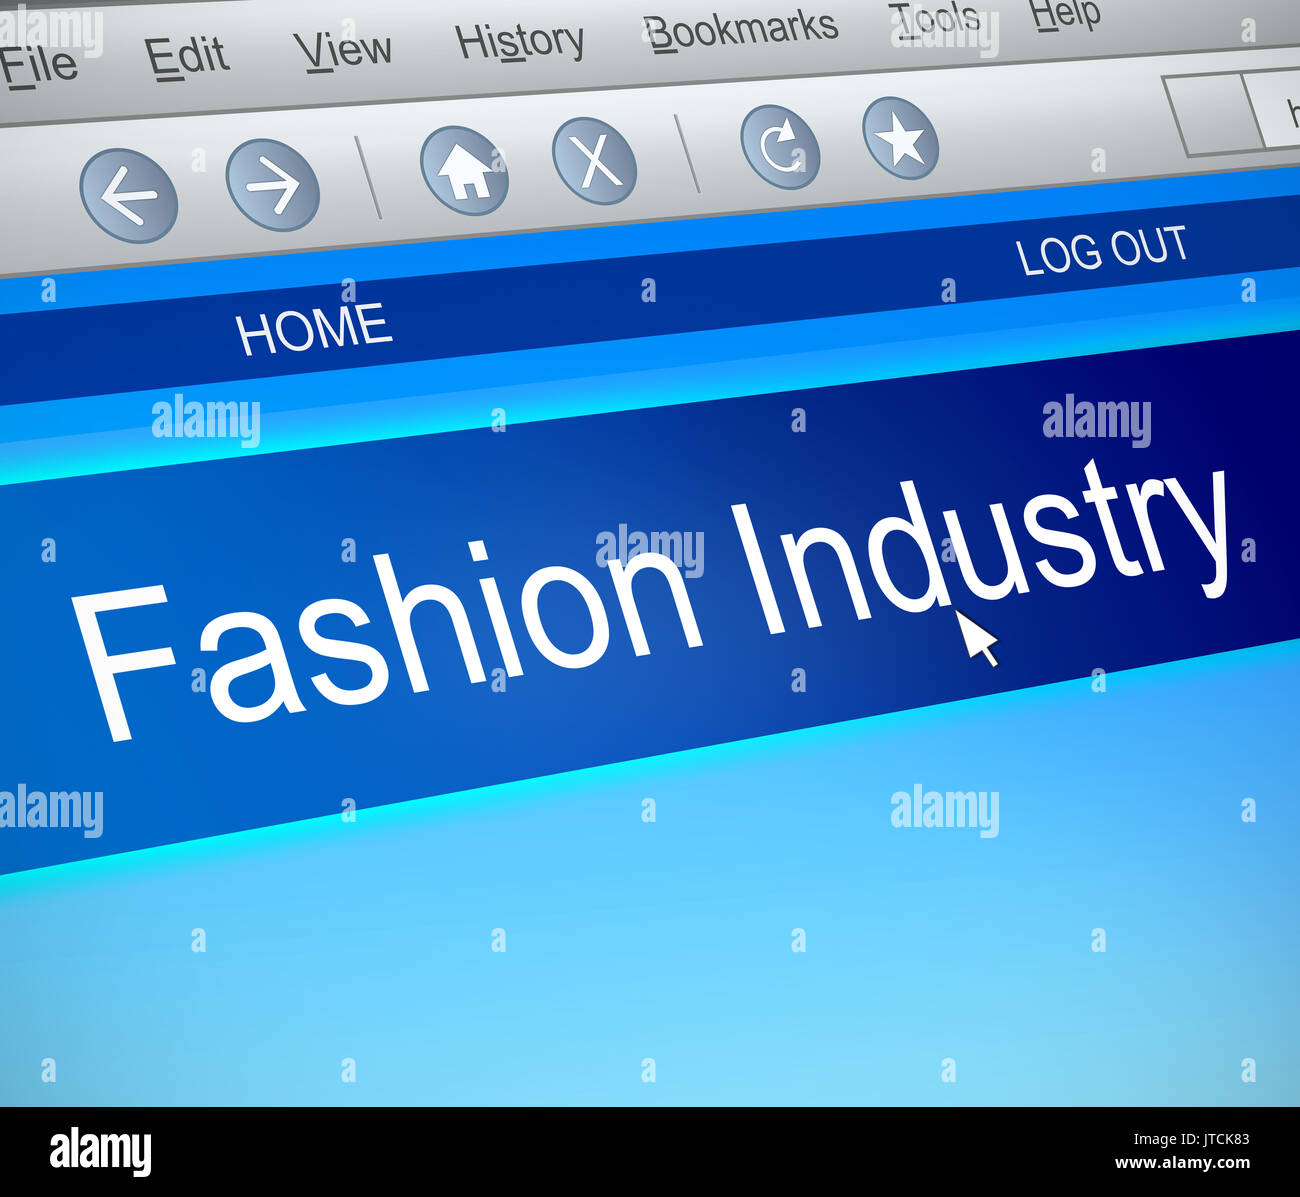 3d Illustration depicting a computer screen capture with a Fashion Industry concept. Stock Photo